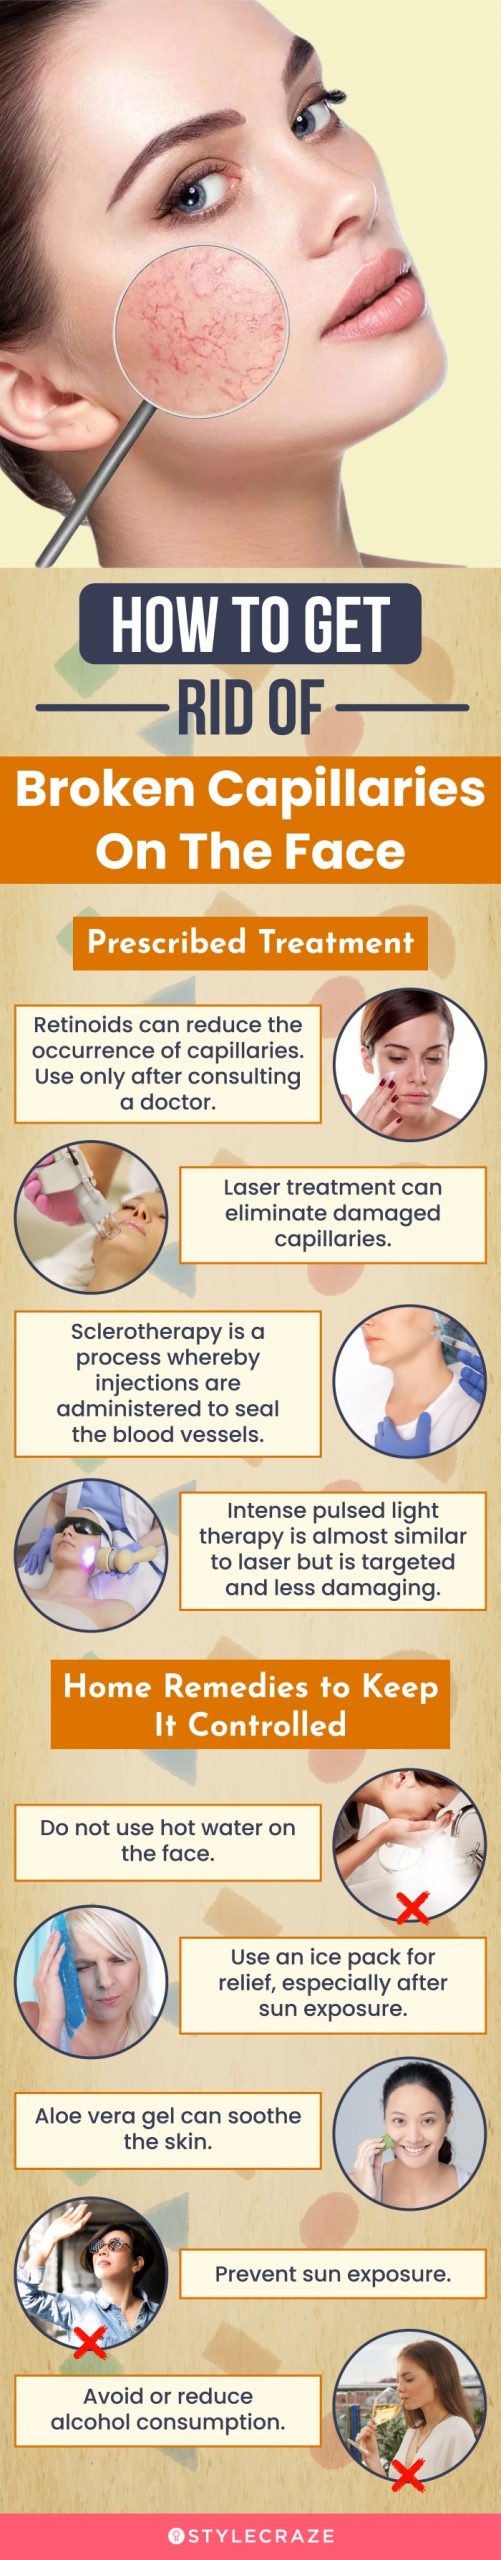 how to get rid of broken capillaries on face (infographic)